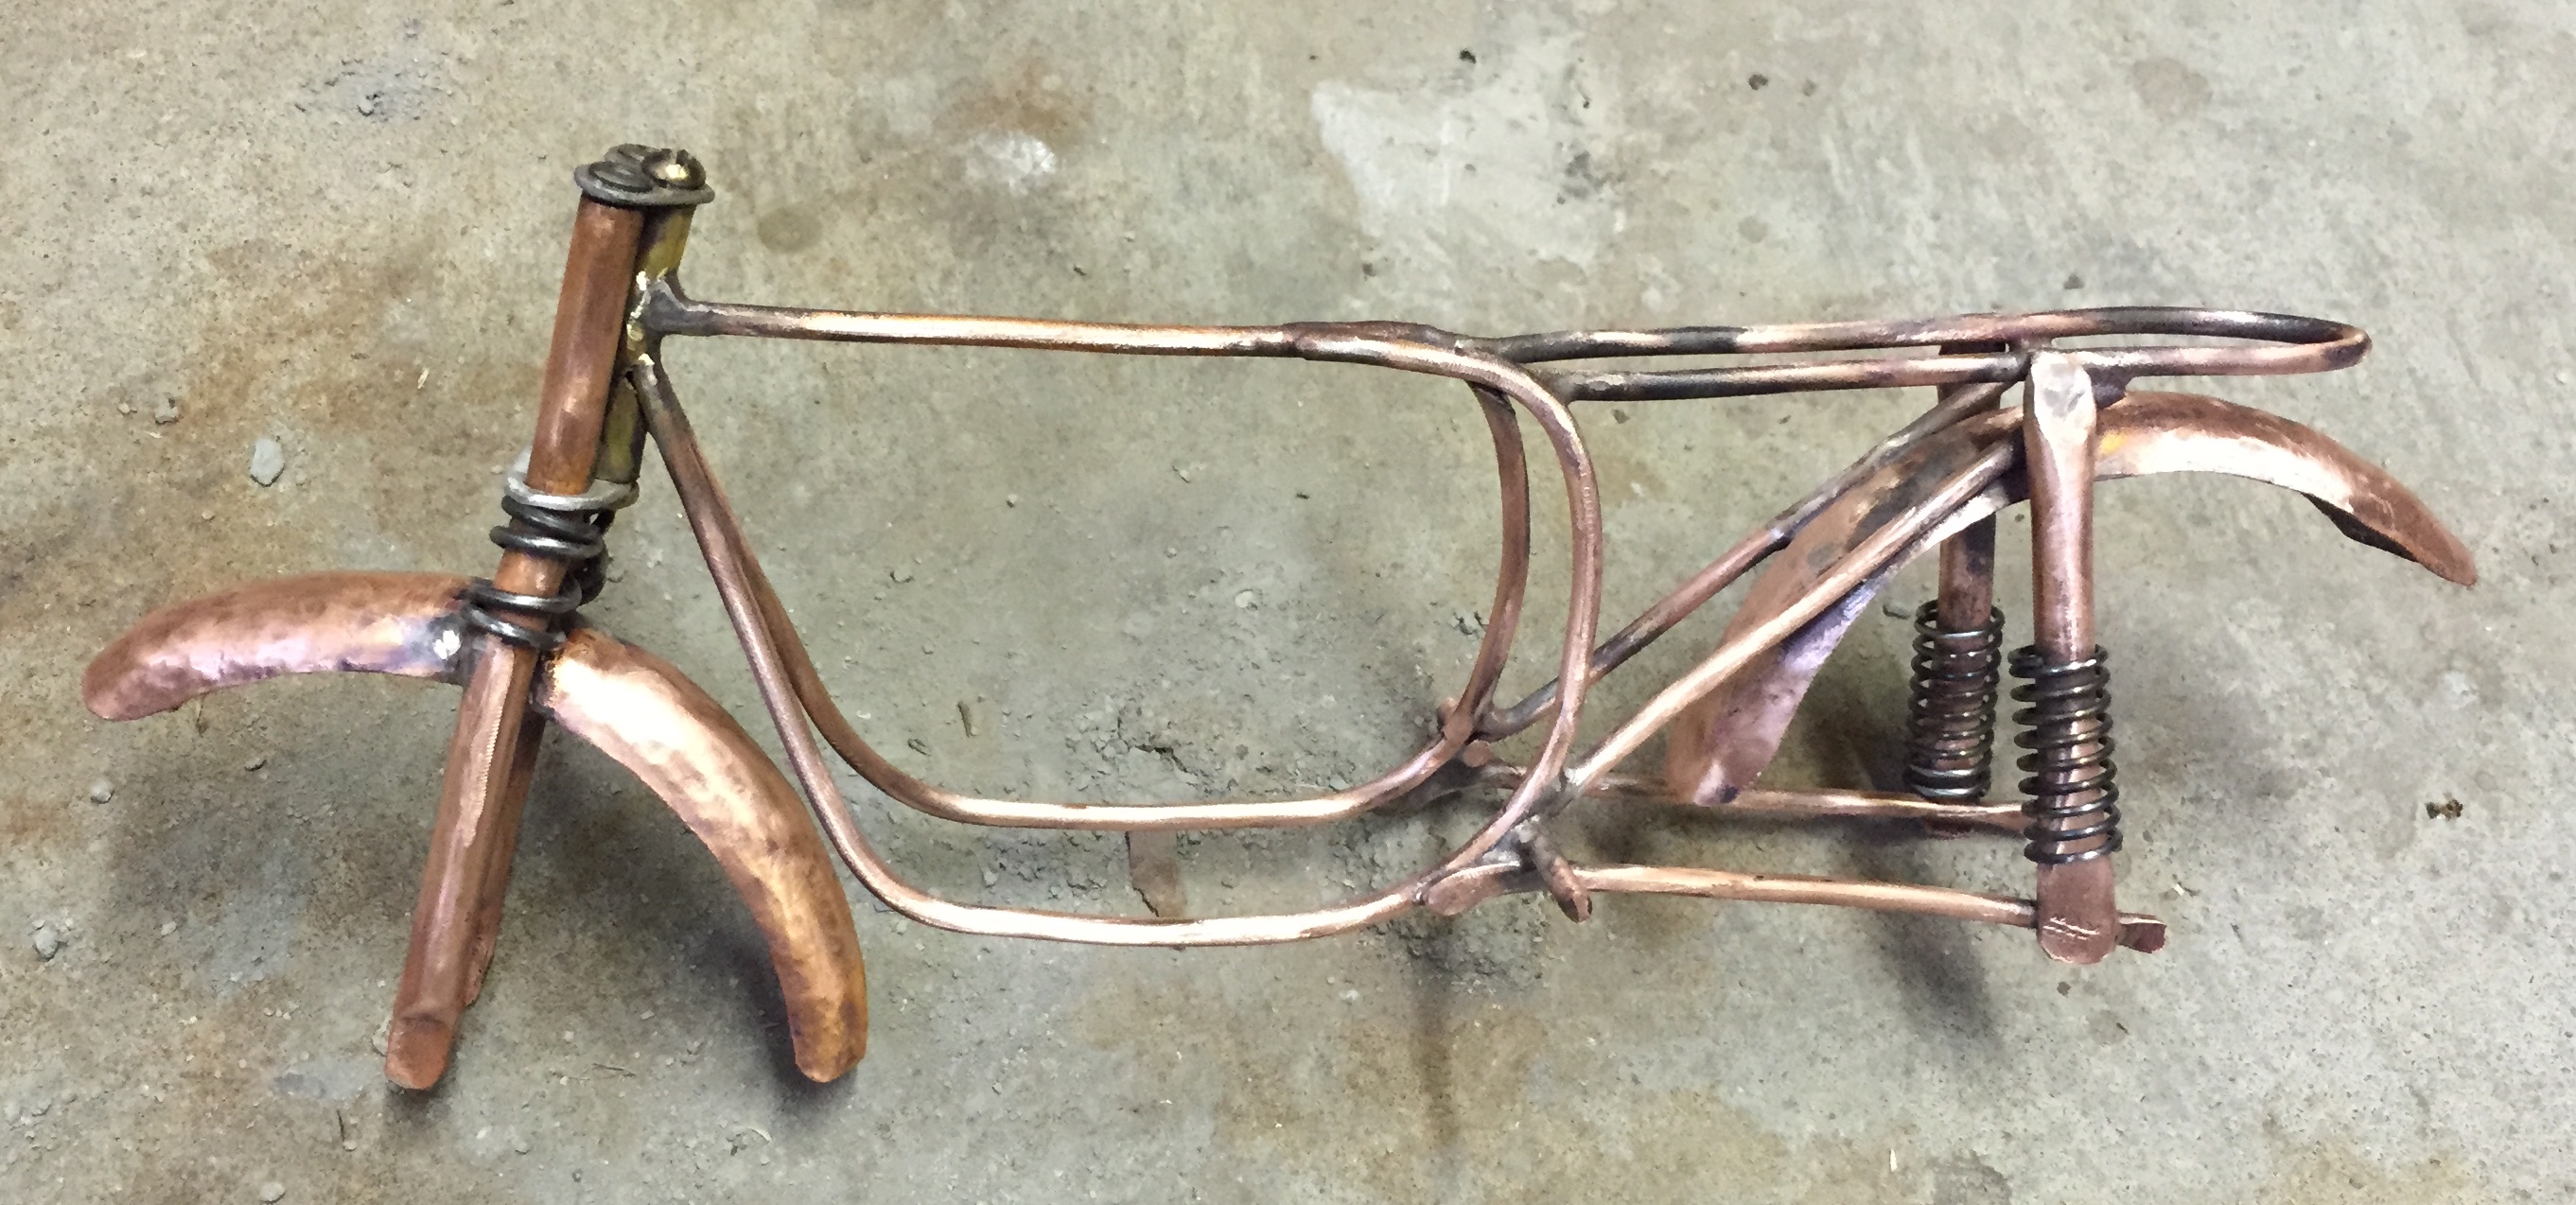 copper cycle frame with fenders and springs